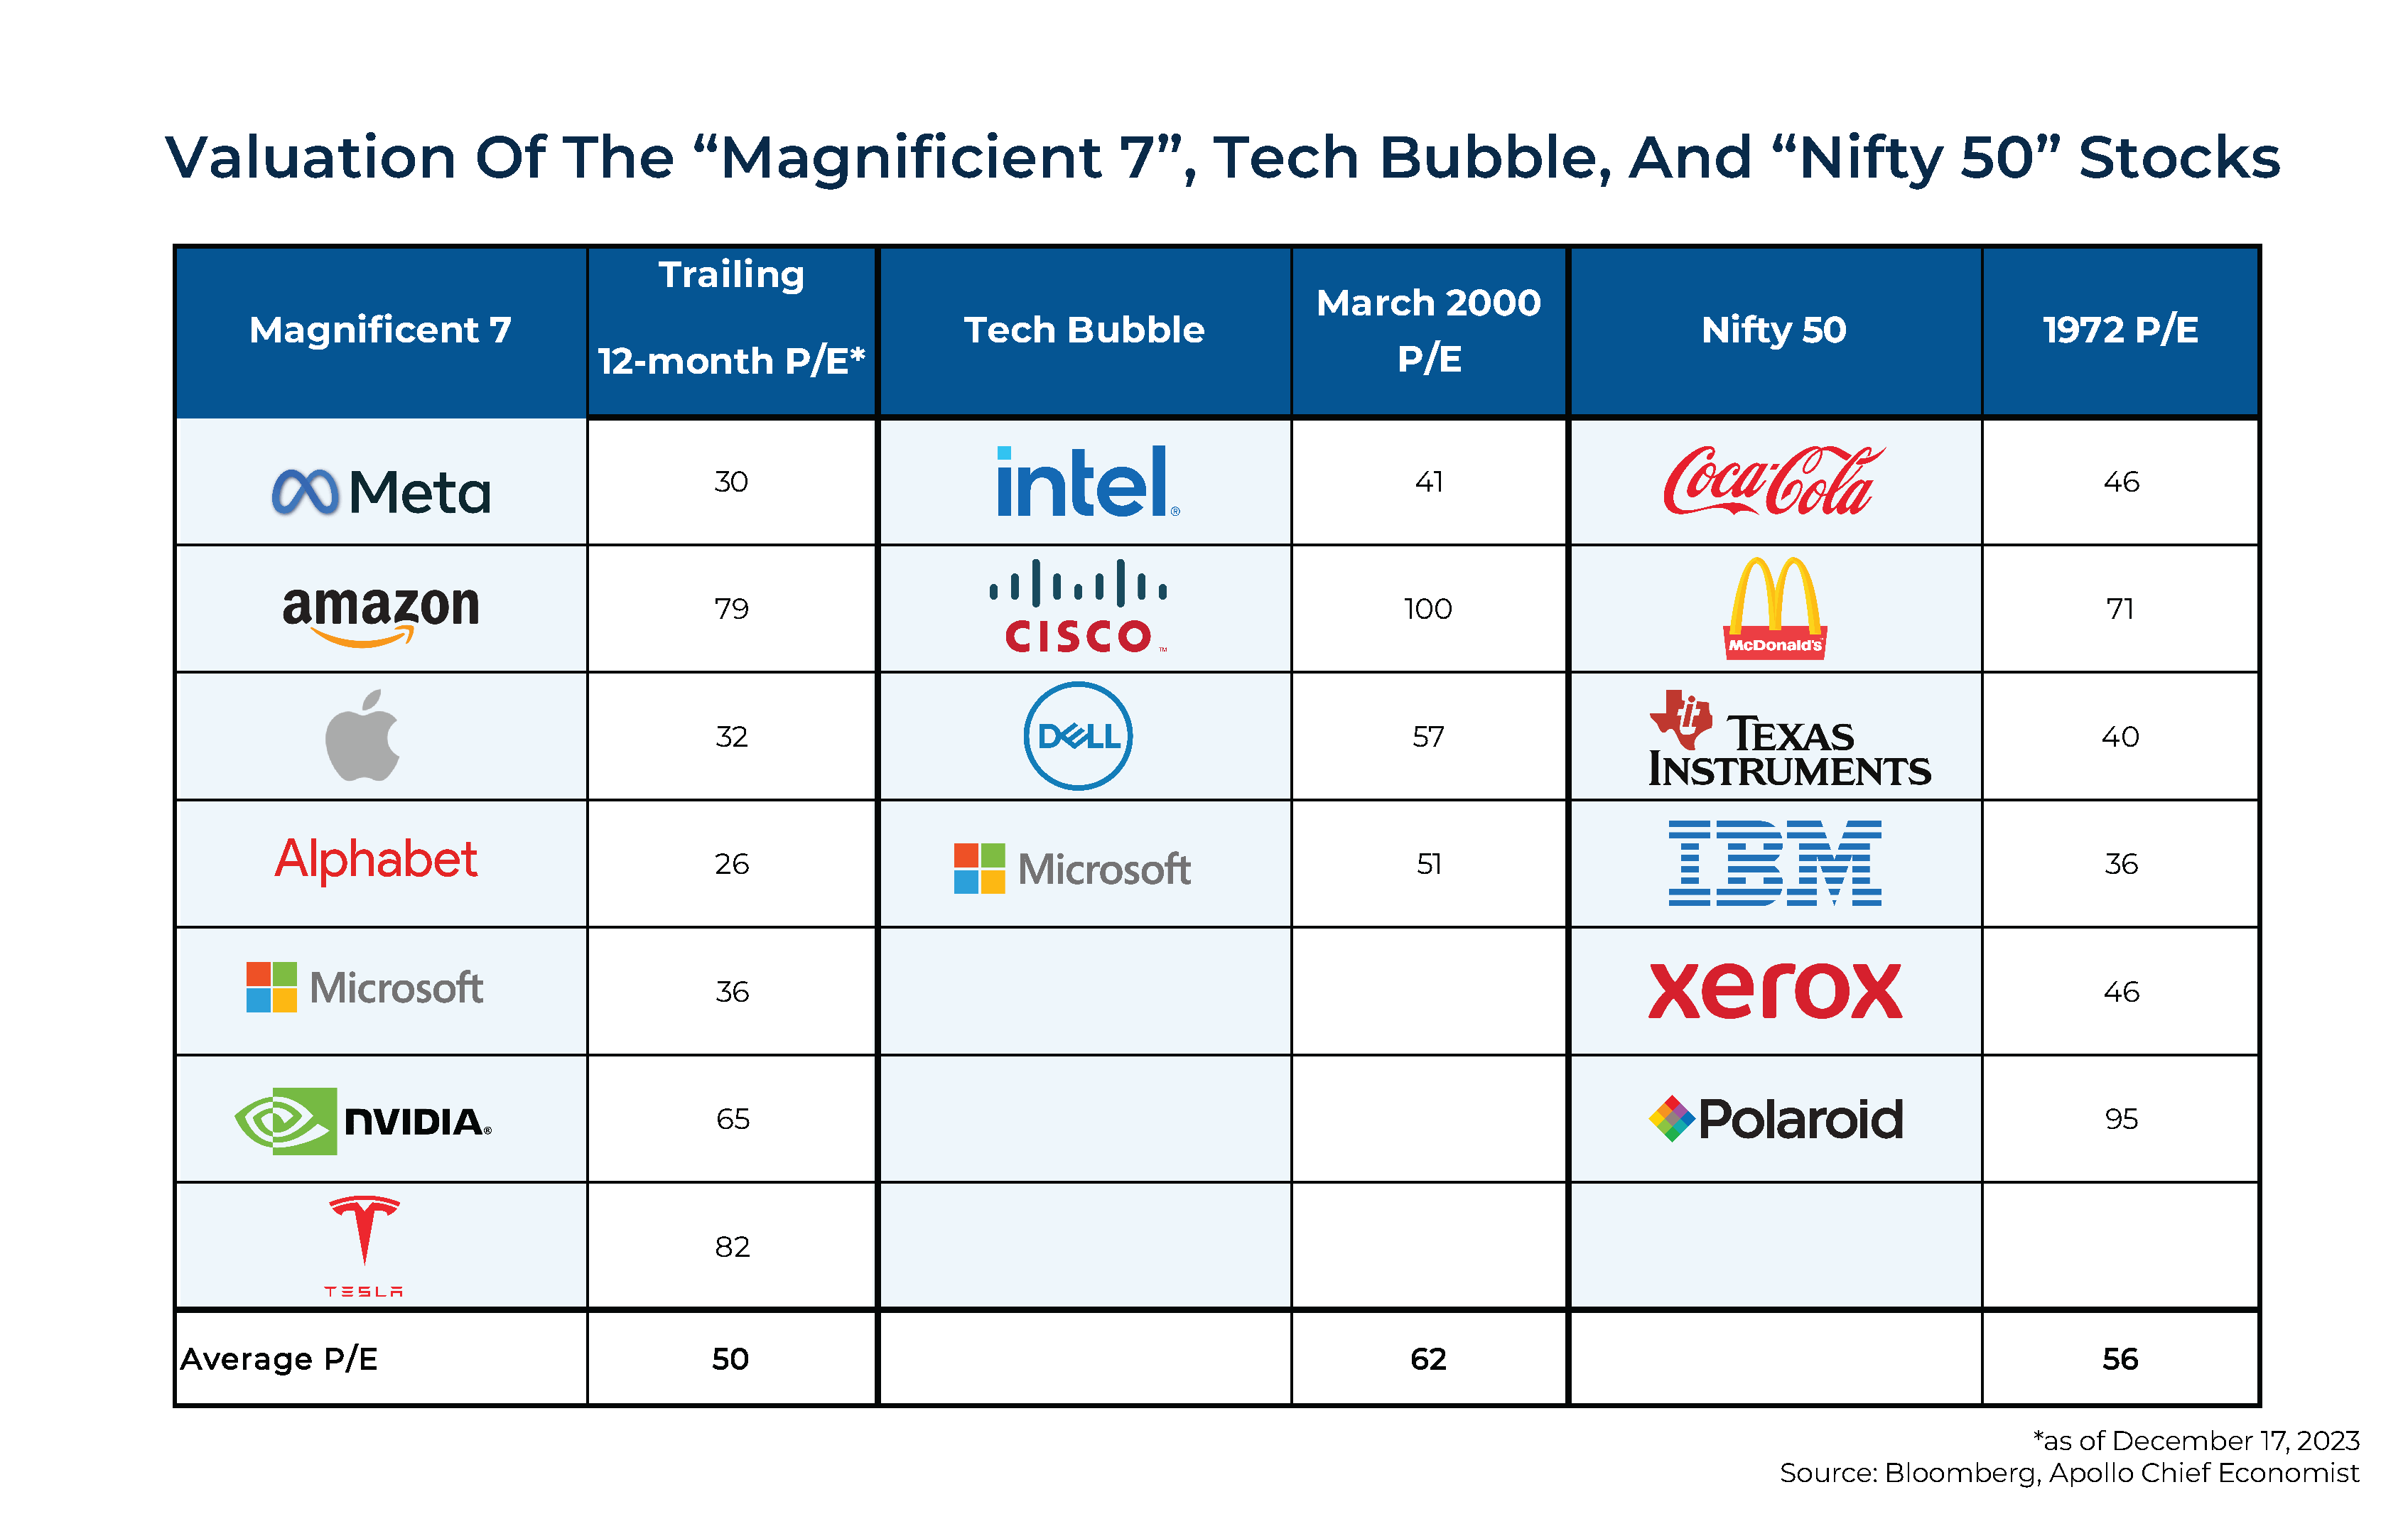 Valuation Of The 'Magnificient ' Tech Bubble And 'Nifty ' Stocks